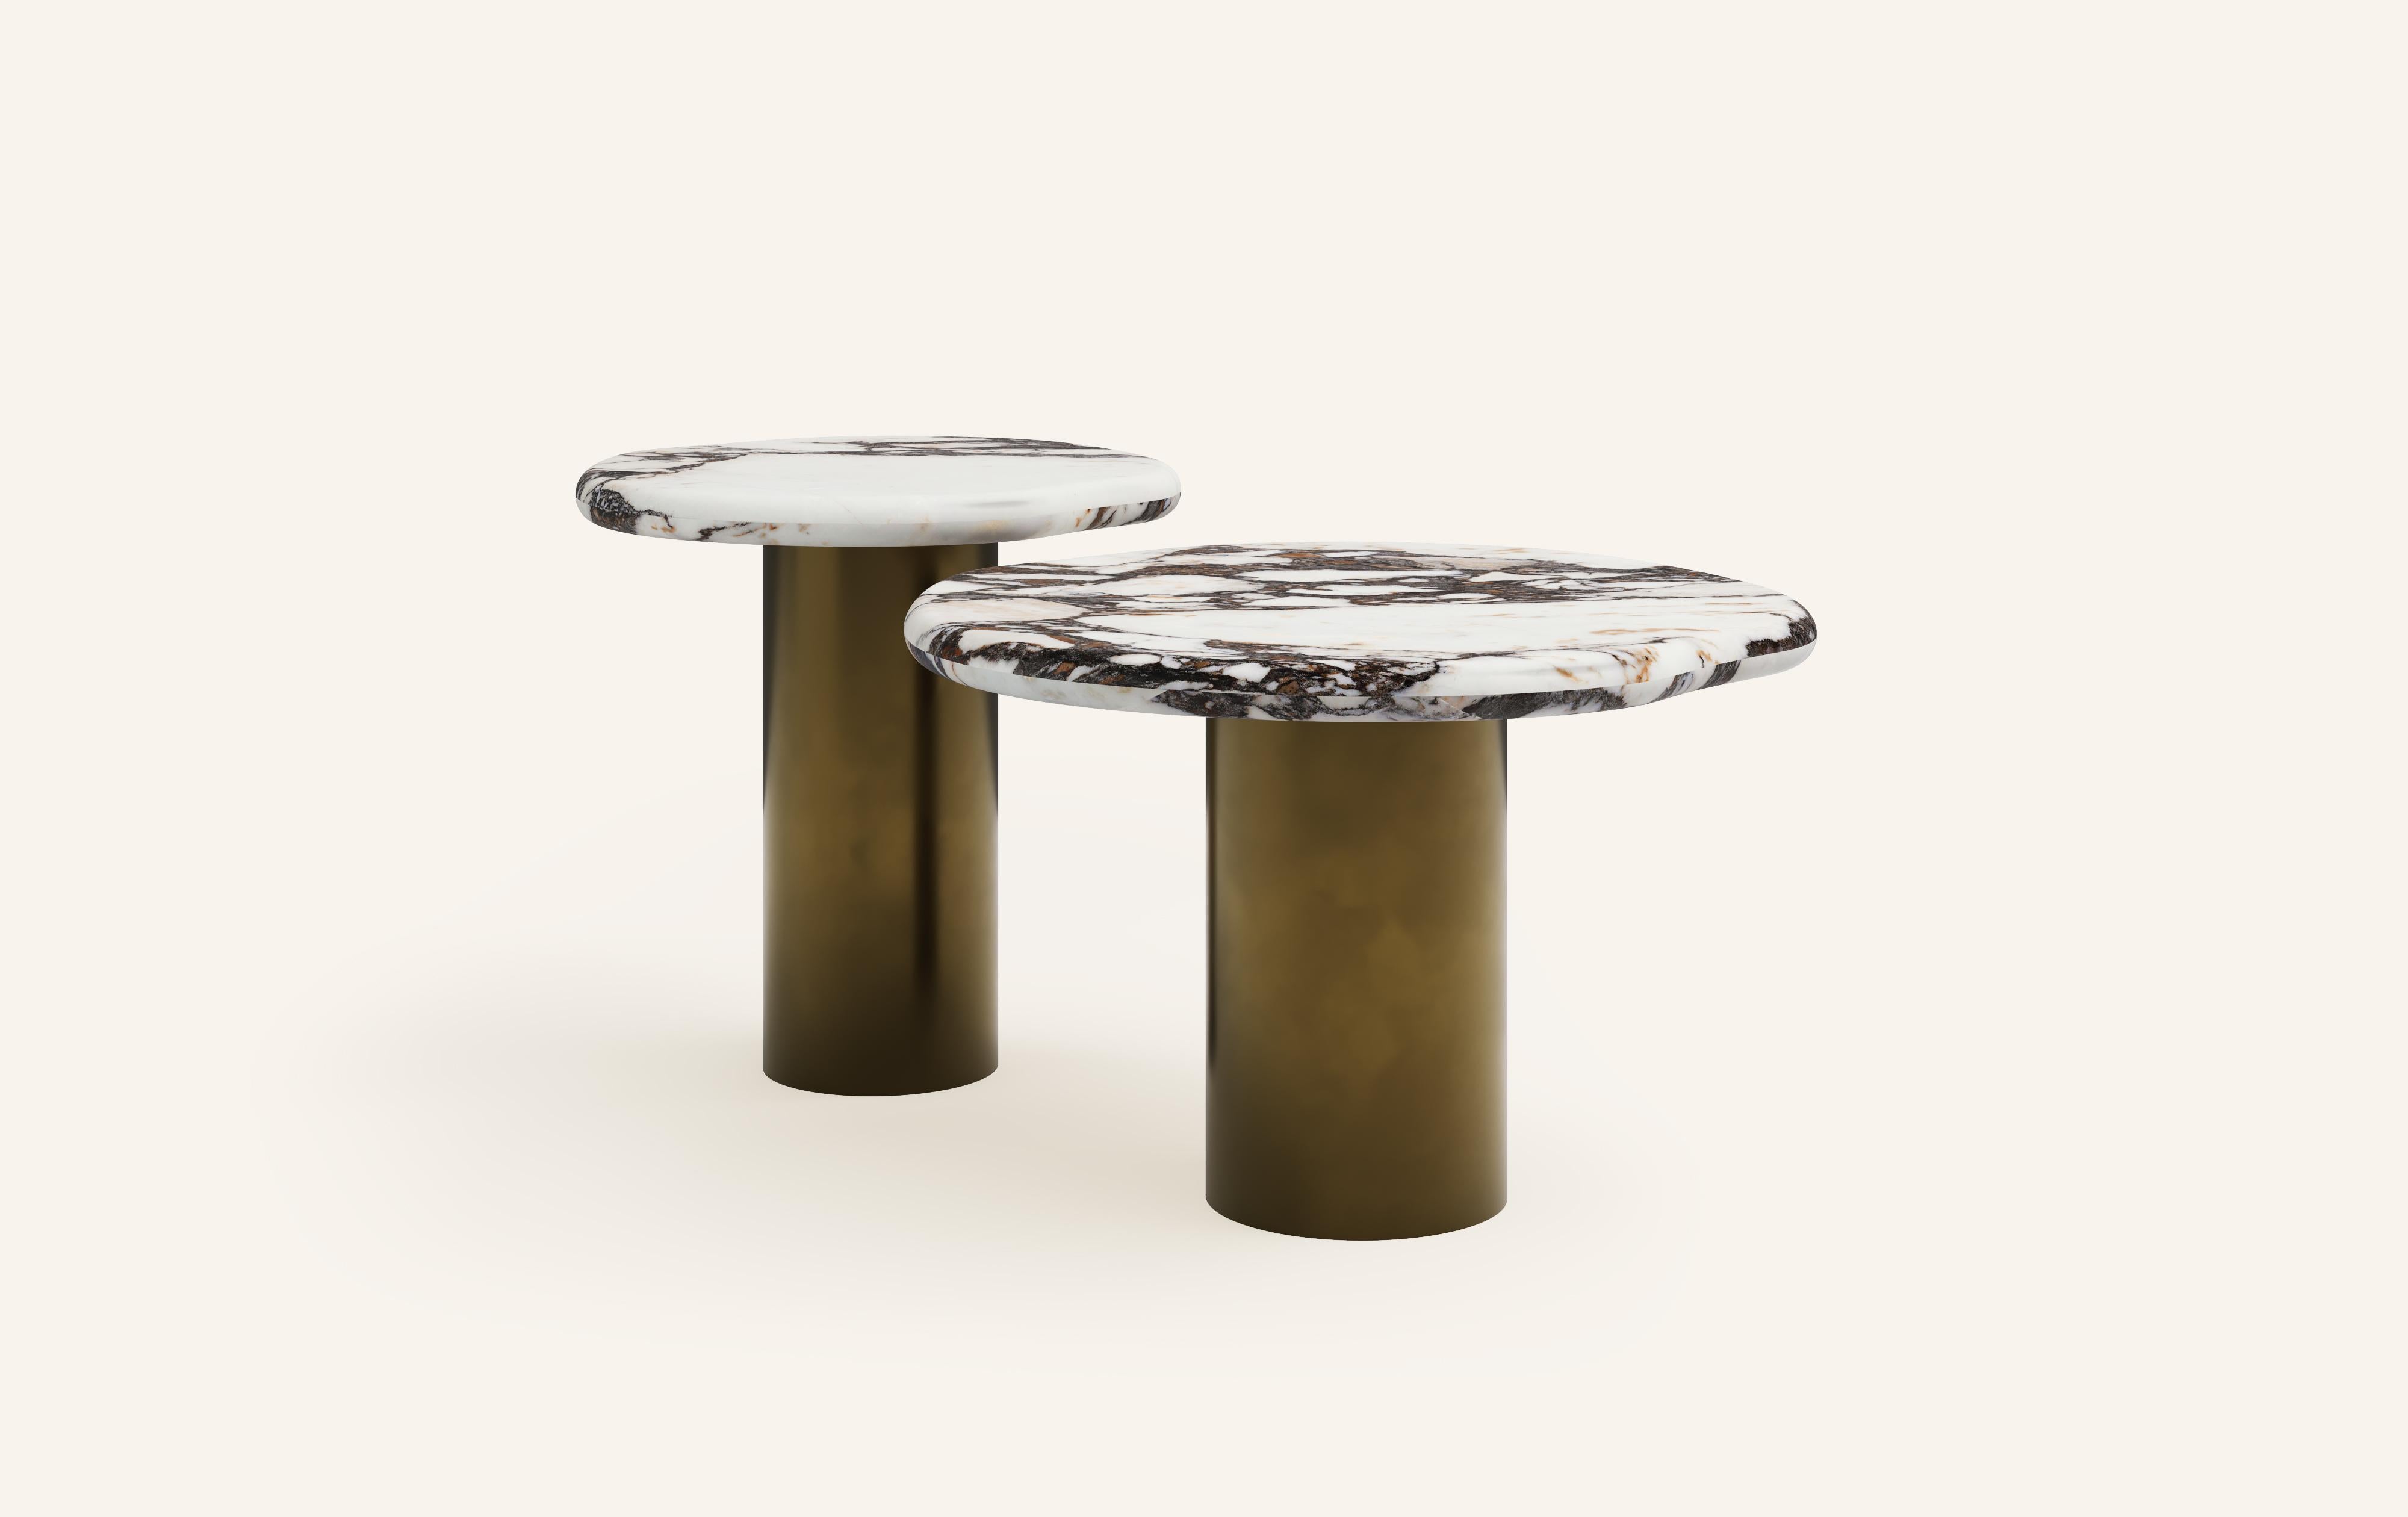 ‘LAGO’, ITALIAN FOR ‘LAKE’, HAS INSPIRED A FORM DERIVED FROM NATURE, TEXTURED WITH LUXURIOUS STONES AND METALS. THE COLLECTION ENCOURAGES NESTING AND LAYERING IN ITS AVAILABLE FORMS.

DIMENSIONS: (SIDE TABLES SOLD INDIVIDUALLY): 
18”L x 18”W x 18”H: